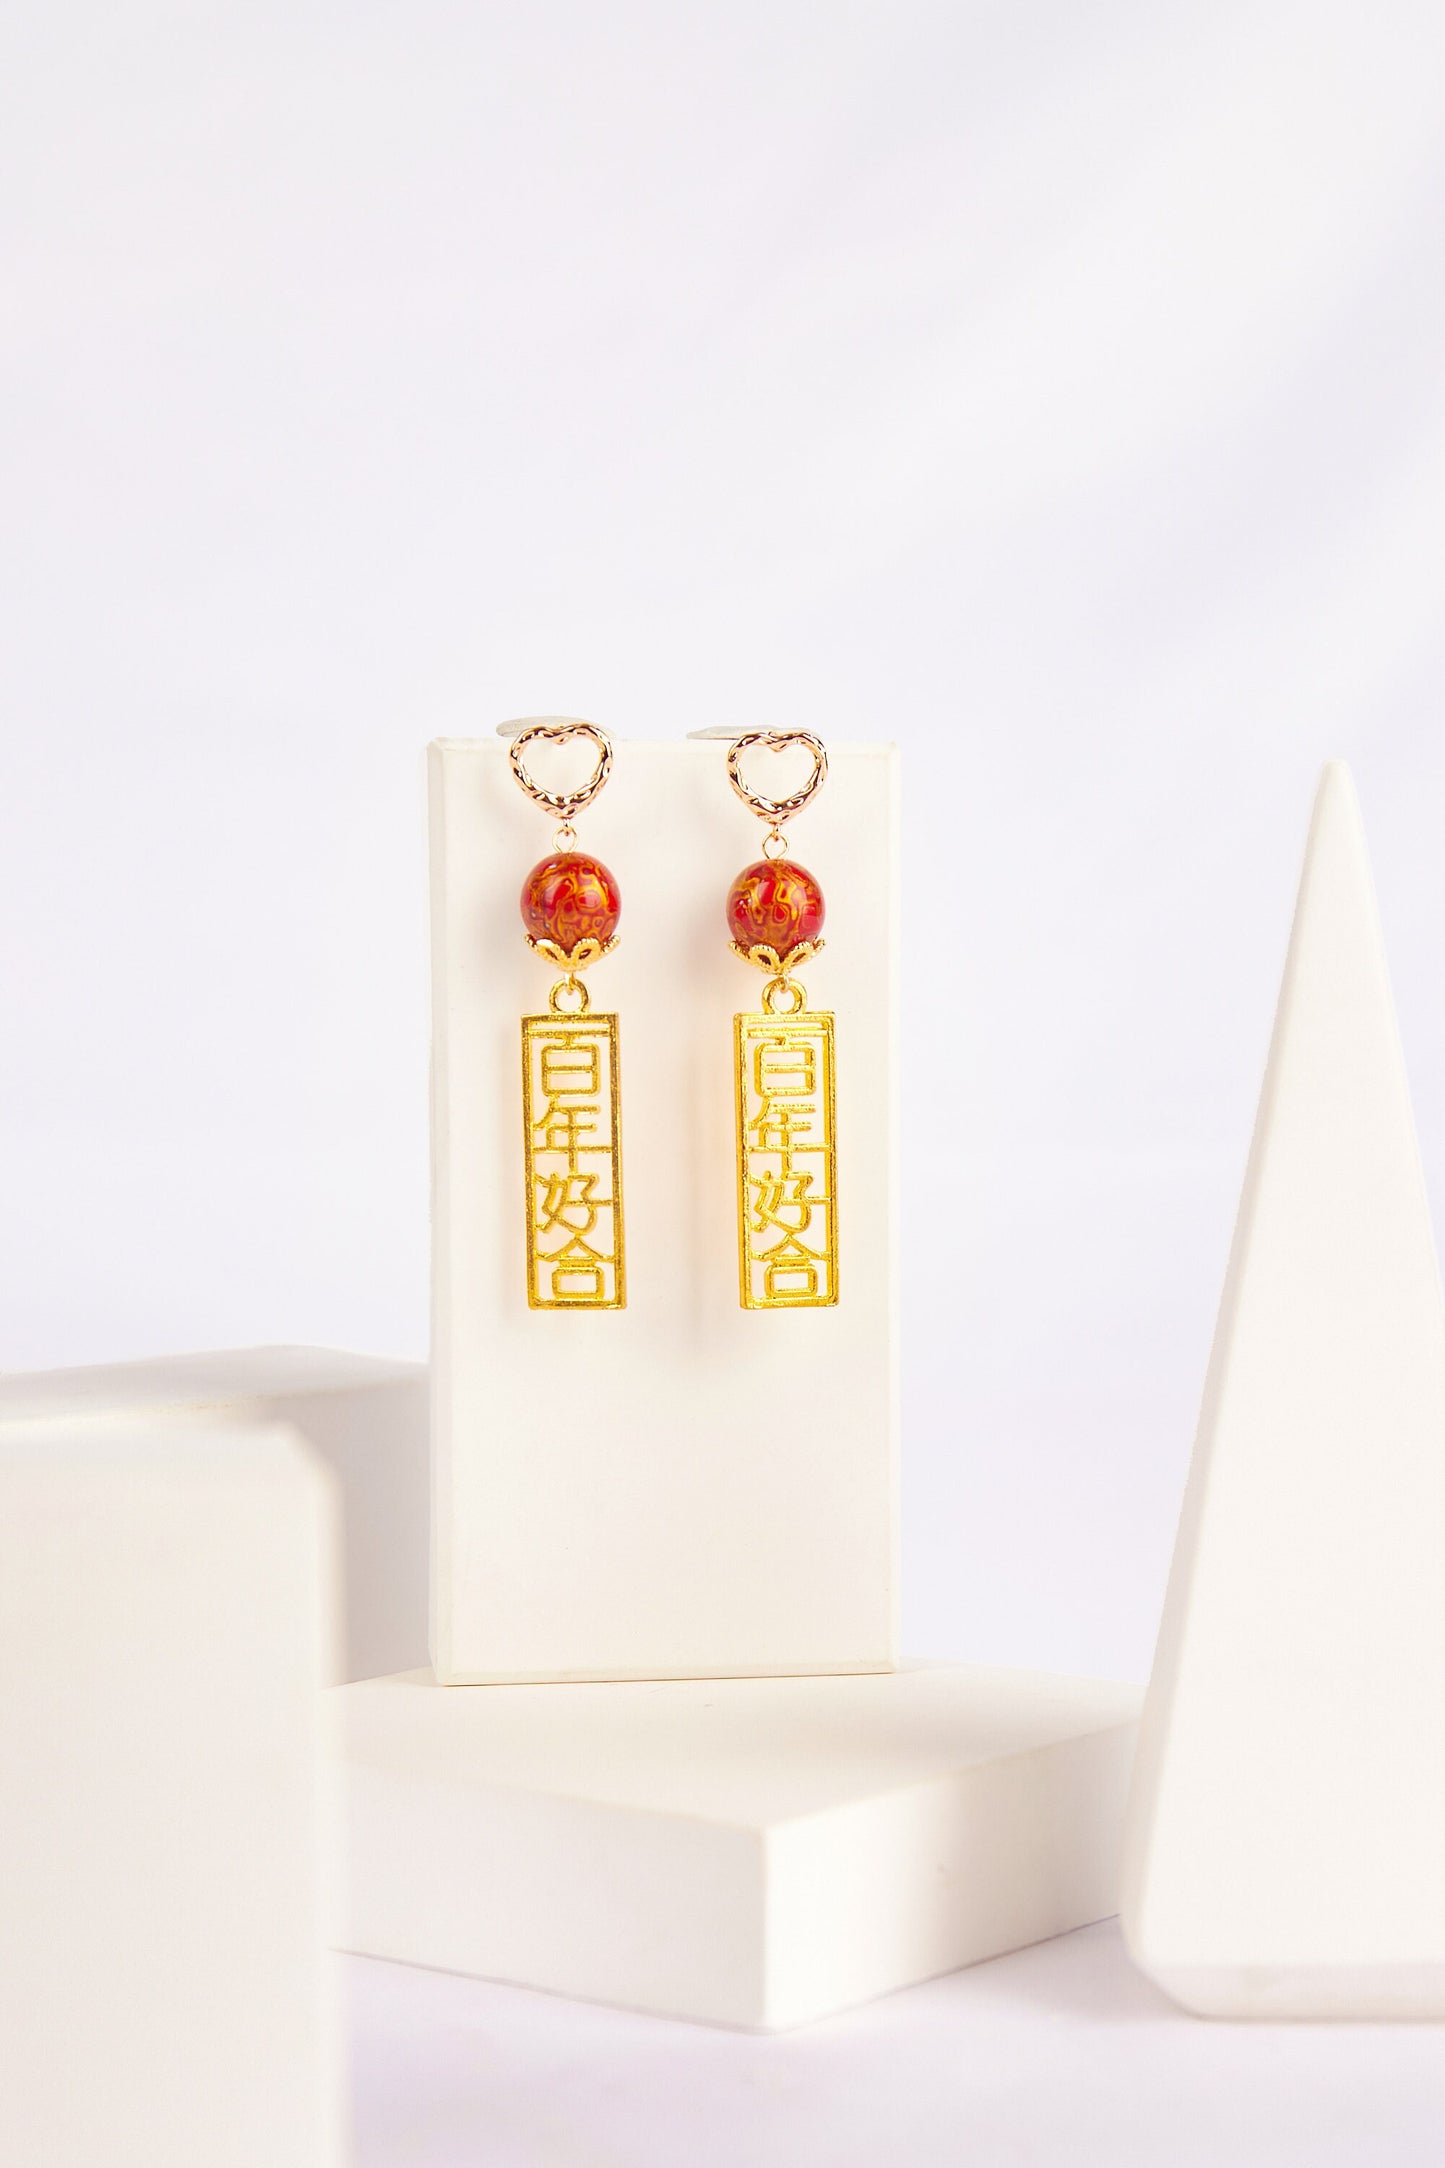 Jewelry/Lacquer earrings "LOVE FOR 100 YEARS"/lucky red ball